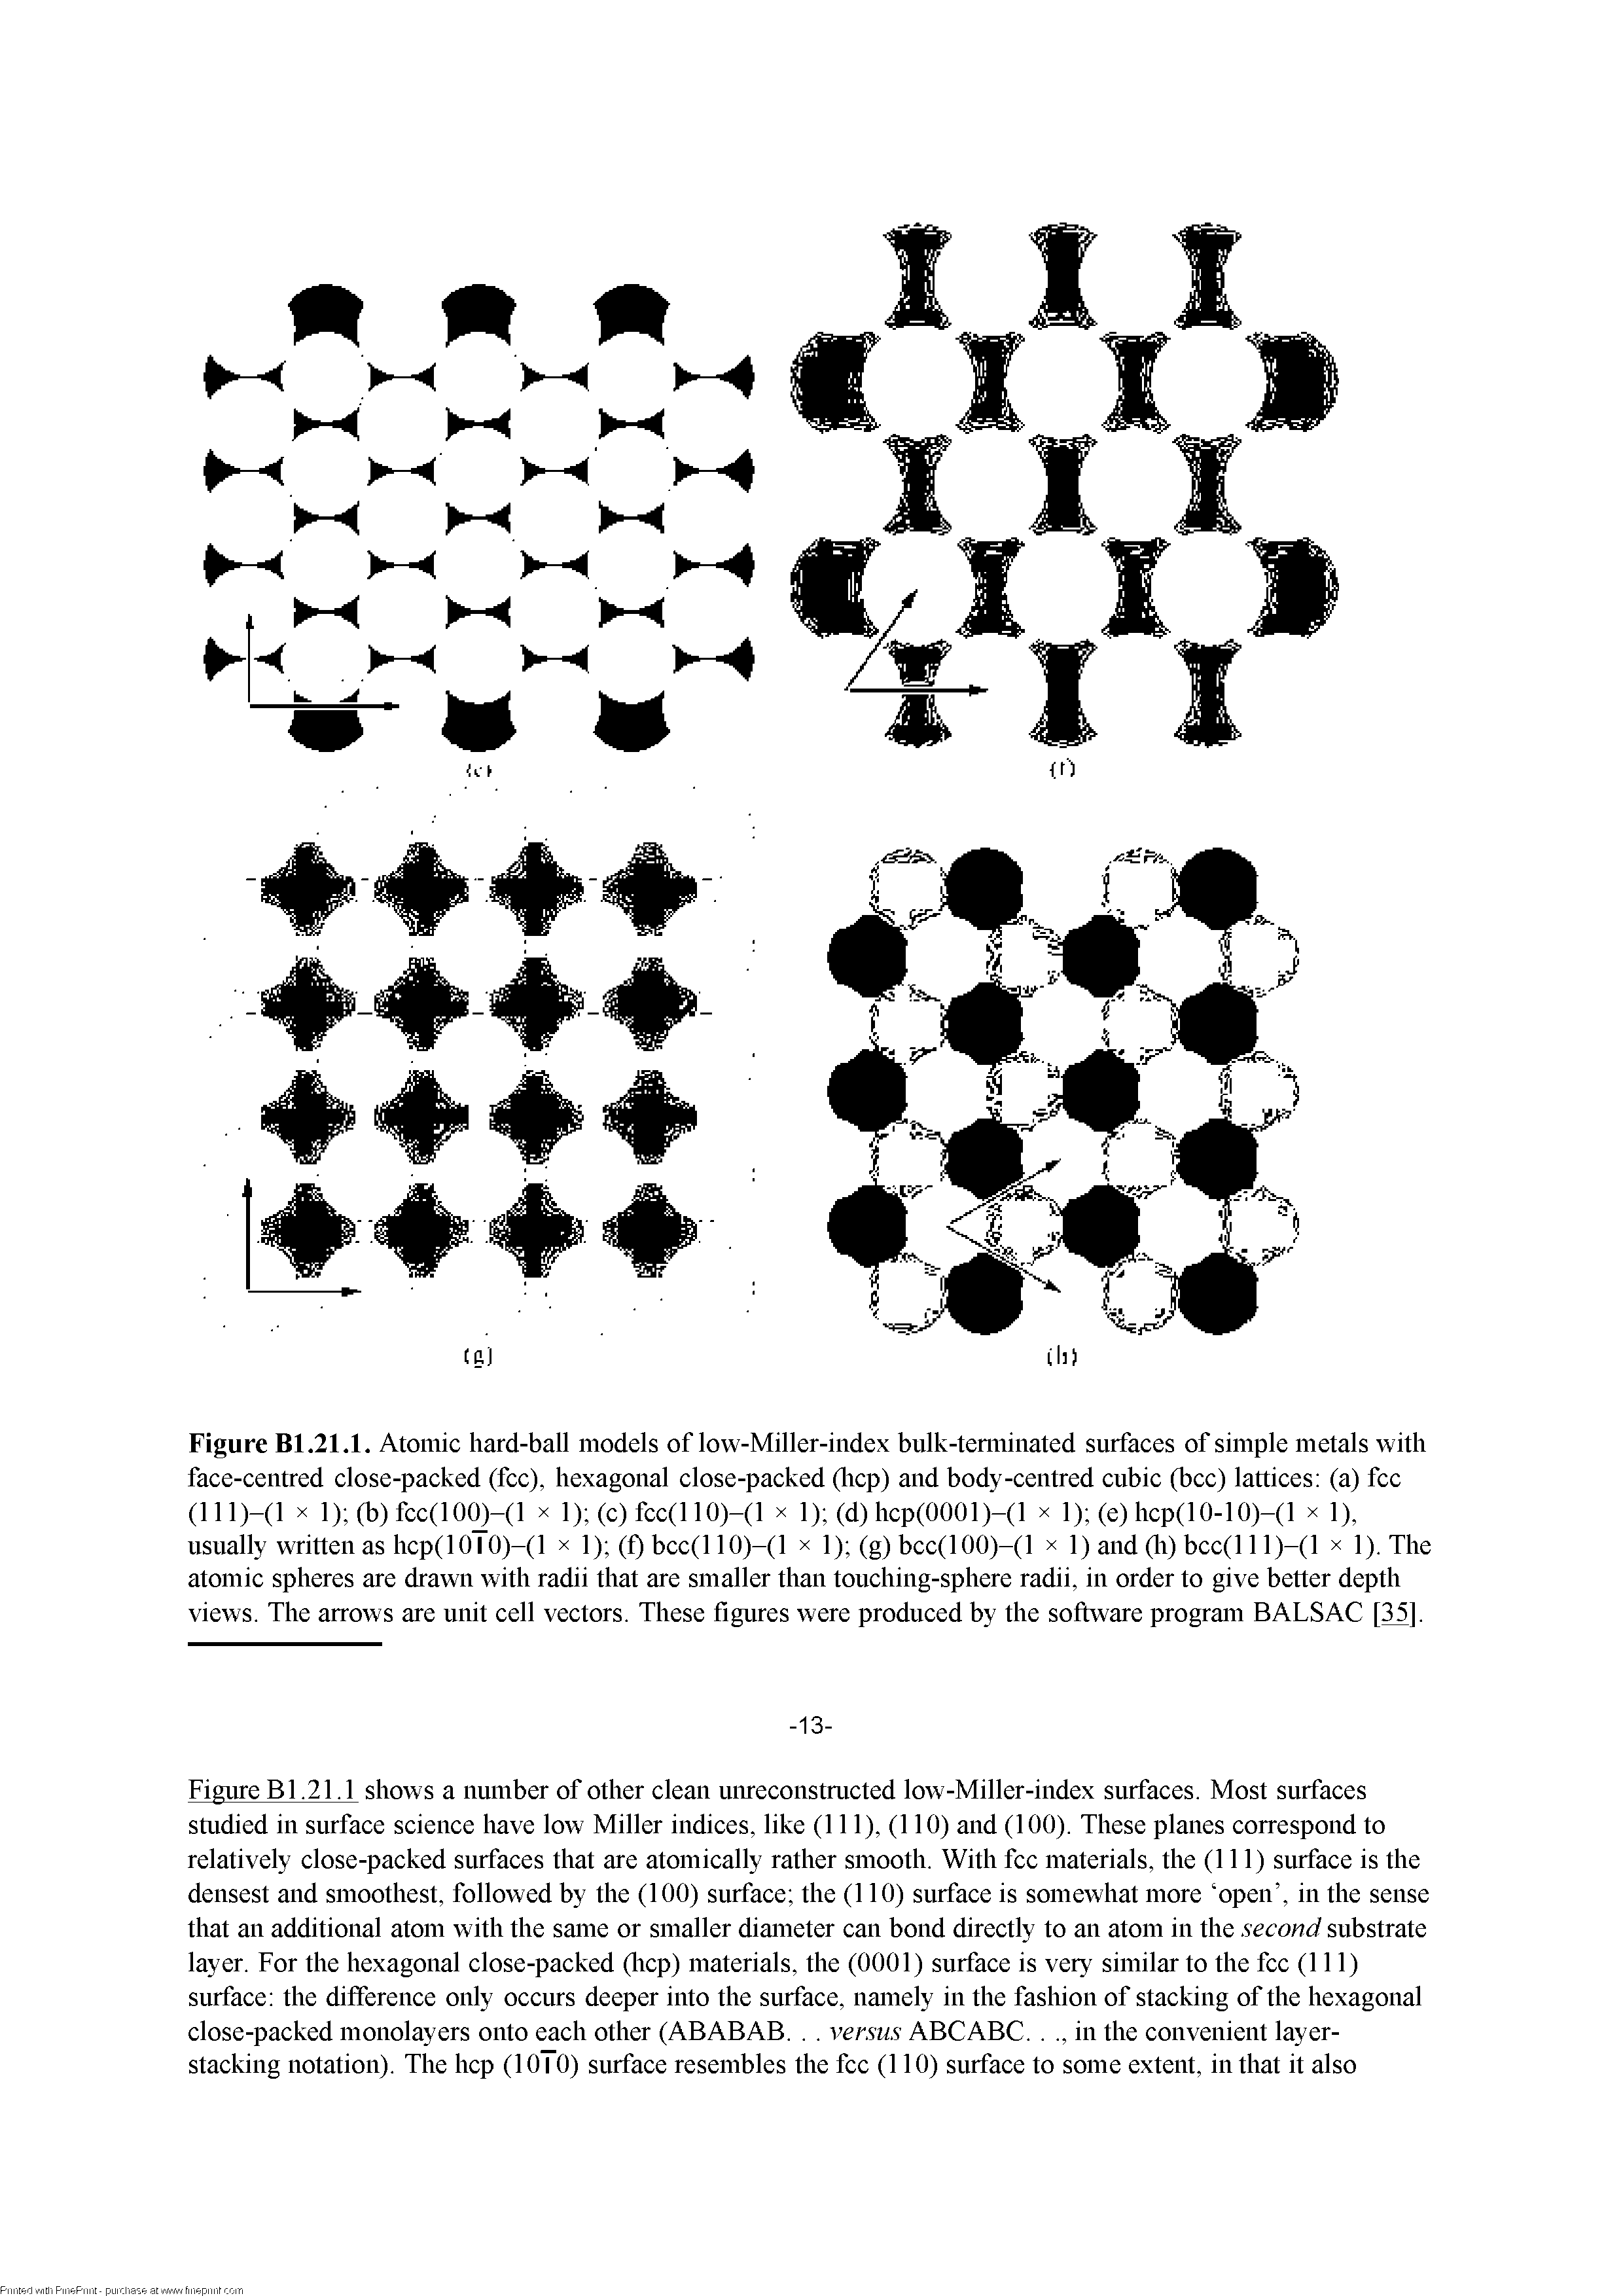 Figure Bl.21.1. Atomic hard-ball models of low-Miller-index bulk-temiinated surfaces of simple metals with face-centred close-packed (fee), hexagonal close-packed (licp) and body-centred cubic (bcc) lattices (a) fee (lll)-(l X 1) (b)fcc(lO -(l X l) (c)fcc(110)-(l X 1) (d)hcp(0001)-(l x 1) (e) hcp(l0-10)-(l X 1), usually written as hcp(l010)-(l x 1) (f) bcc(l 10)-(1 x ]) (g) bcc(100)-(l x 1) and (li) bcc(l 11)-(1 x 1). The atomic spheres are drawn with radii that are smaller than touching-sphere radii, in order to give better depth views. The arrows are unit cell vectors. These figures were produced by the software program BALSAC [35]-...